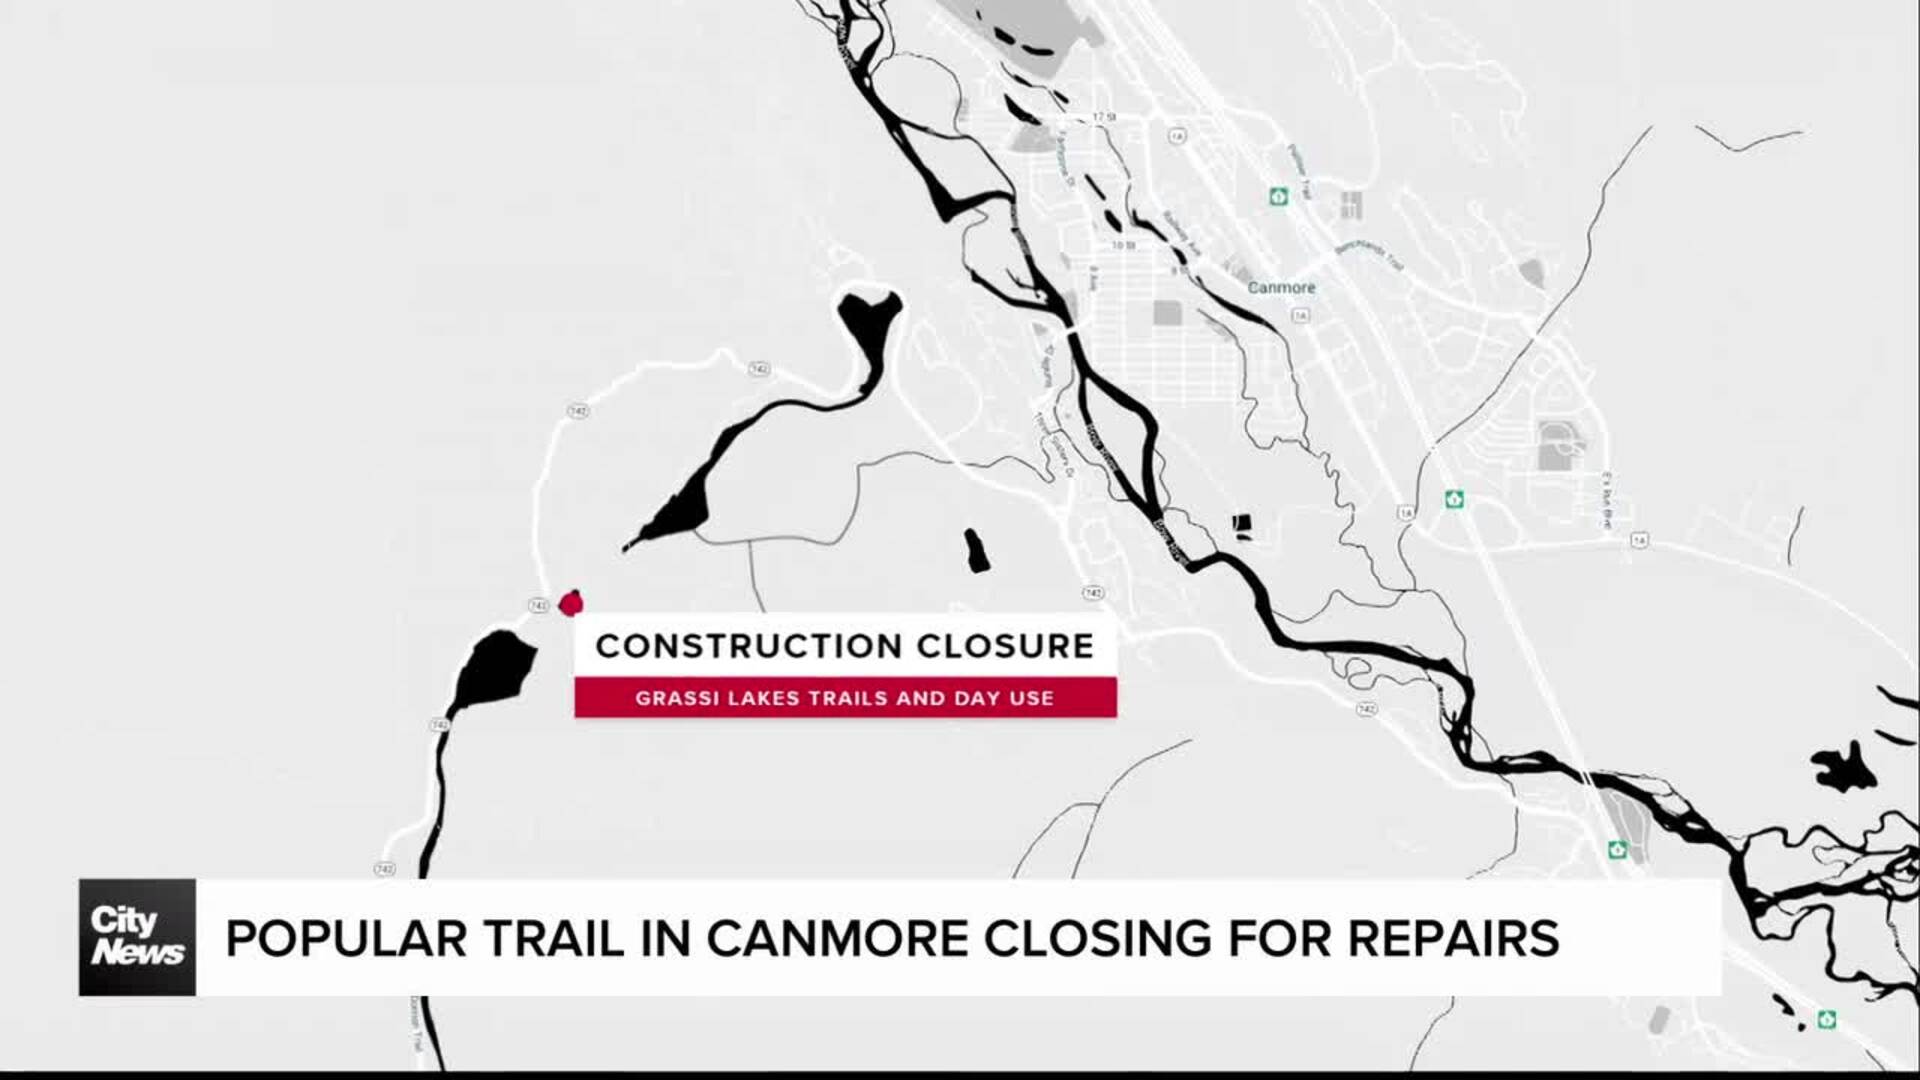 Popular trail in Canmore closing for repairs